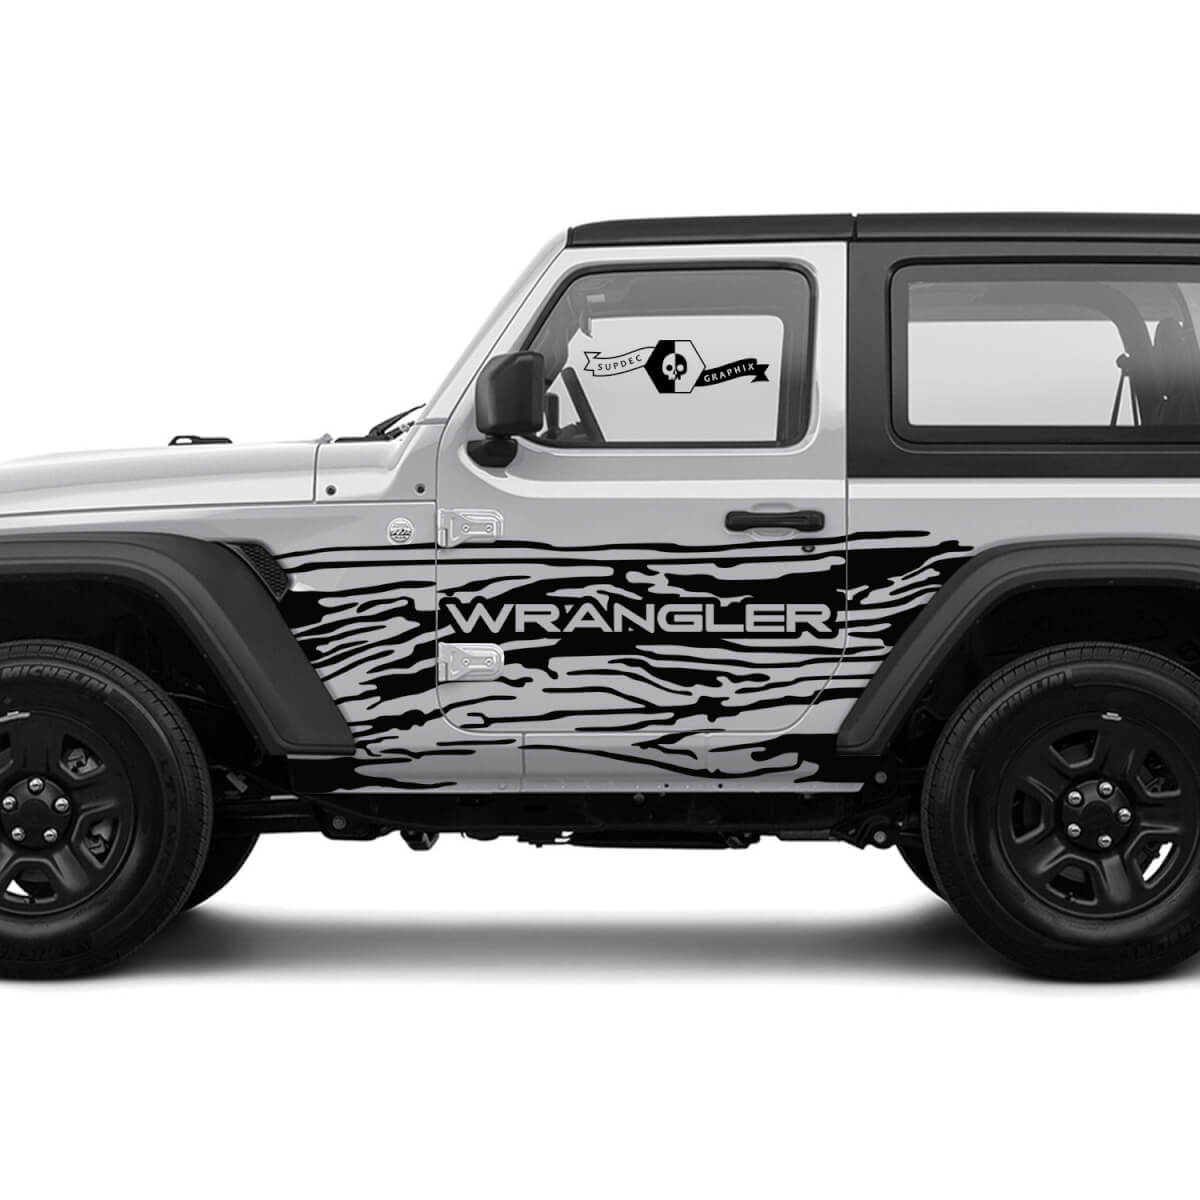 WILLYS Jeep decal sticker in custom colors and sizes